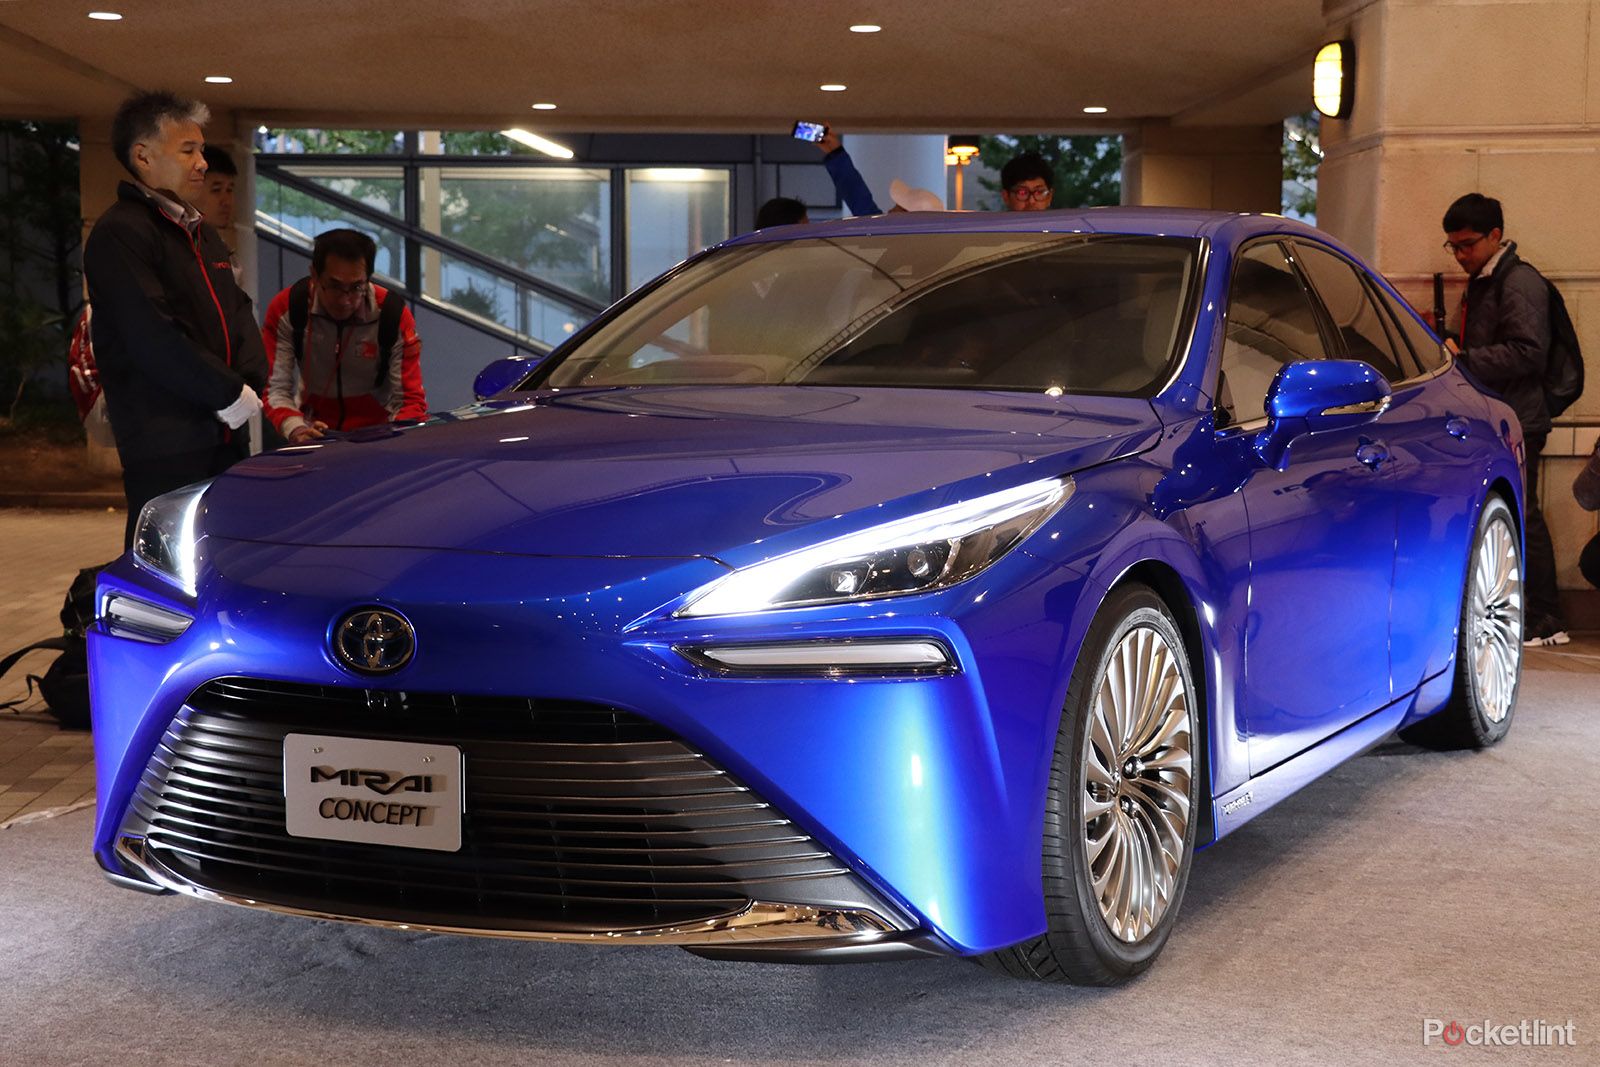 Toyota Mirai 2020 in pictures: A fresh new look